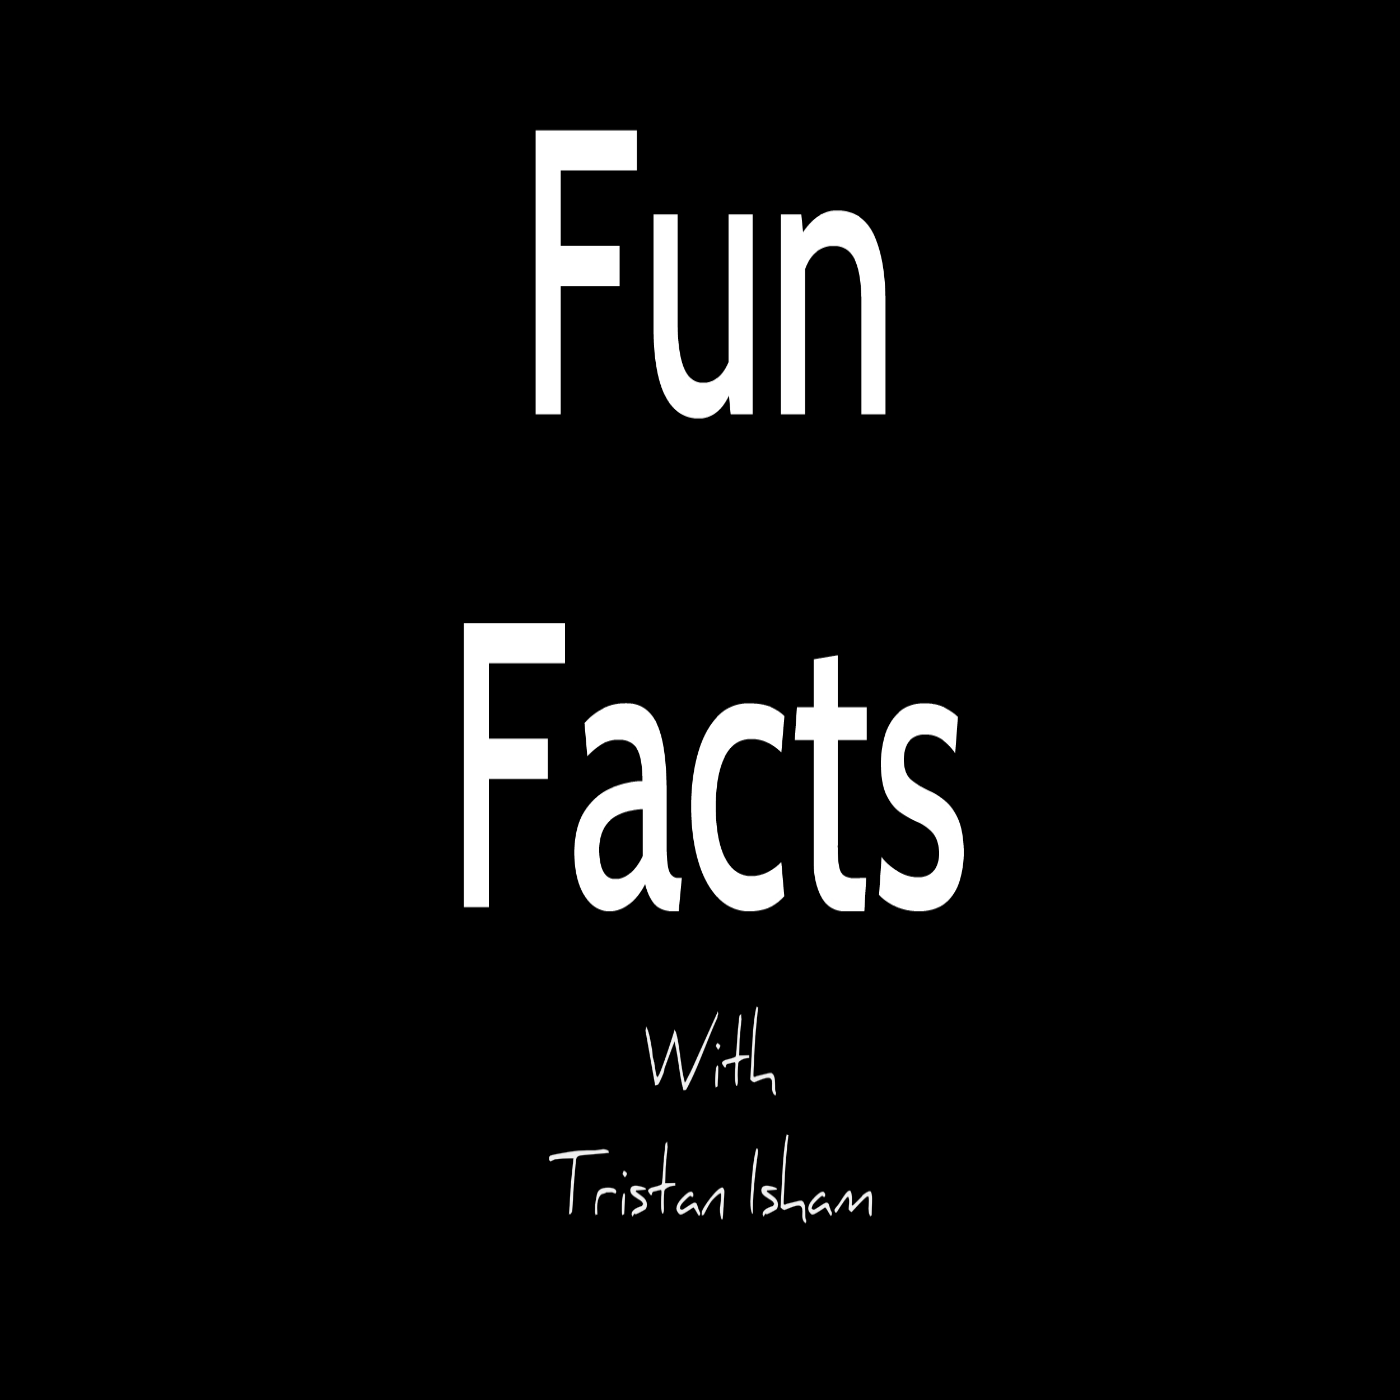 Fun Facts - Introduction